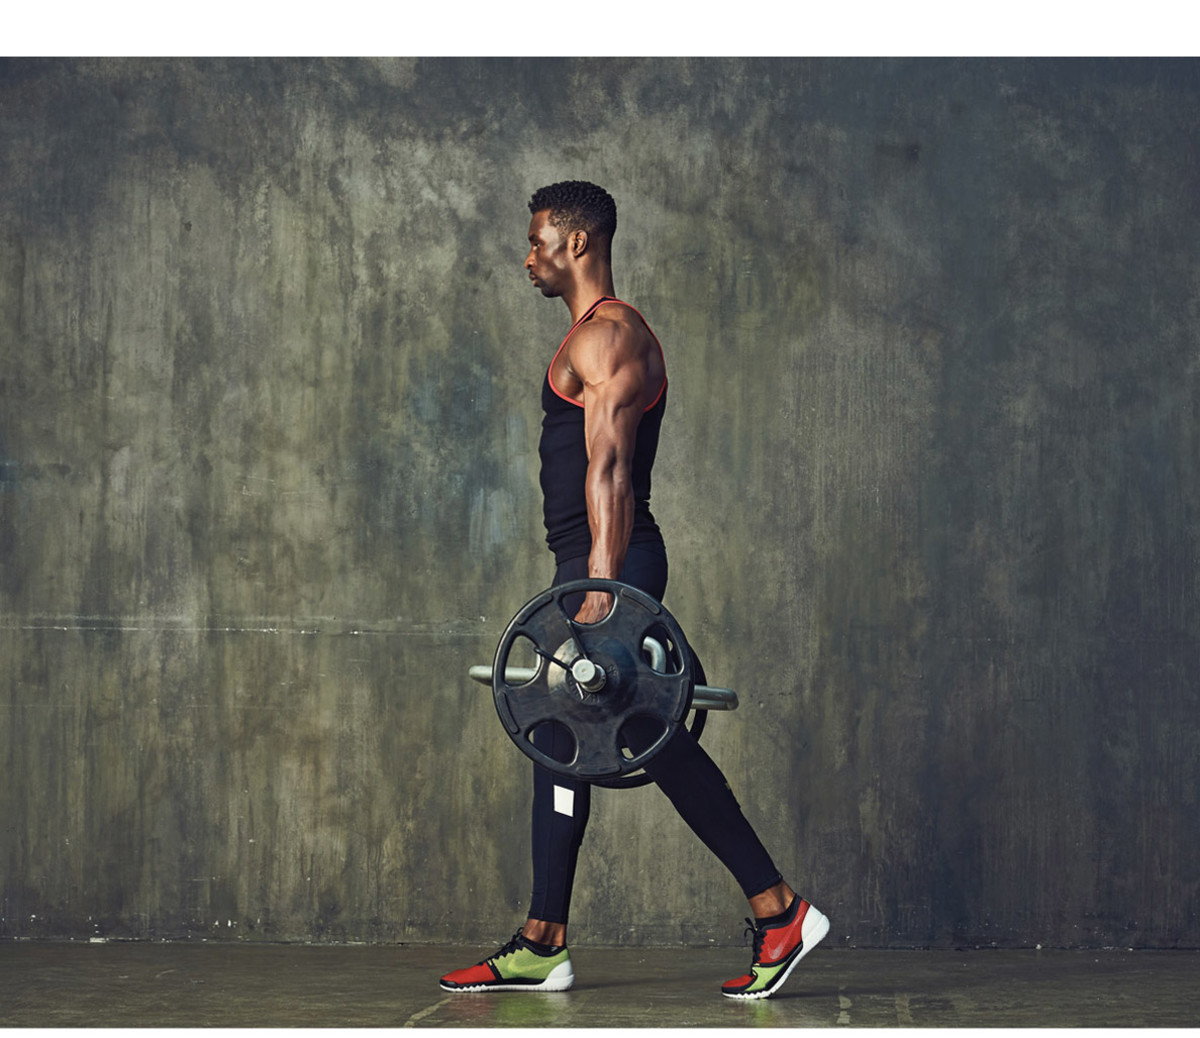 The High and Low Rep Workout Principle For Building Bigger Muscles - Muscle  & Fitness